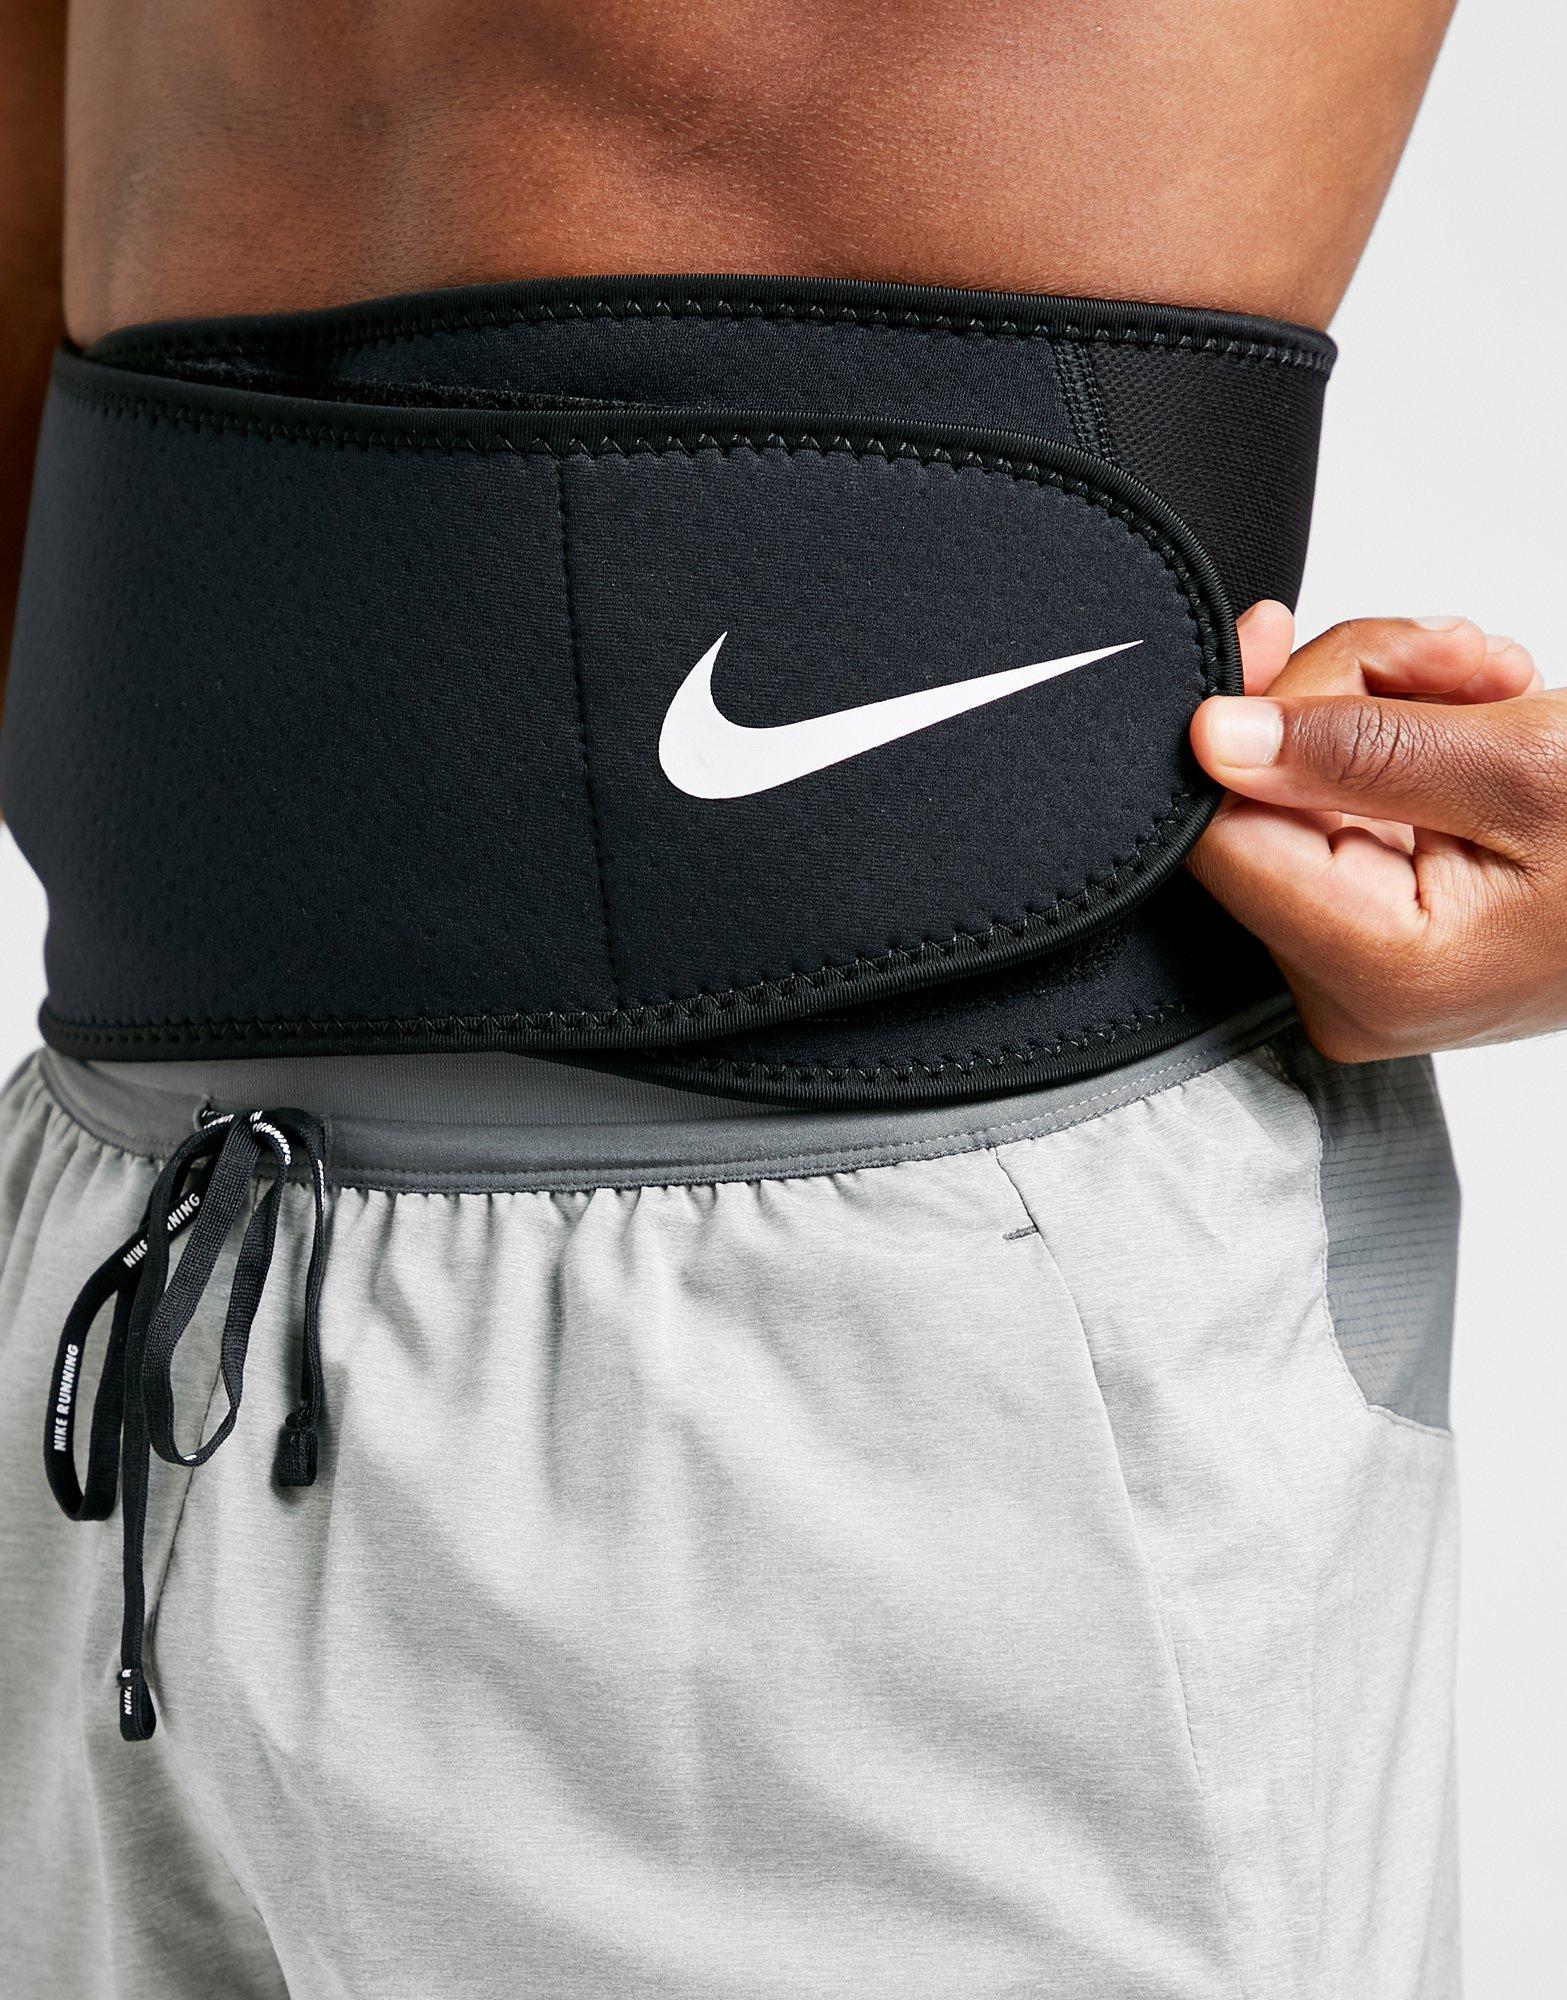 nike pro combat 2 in 1 shorts